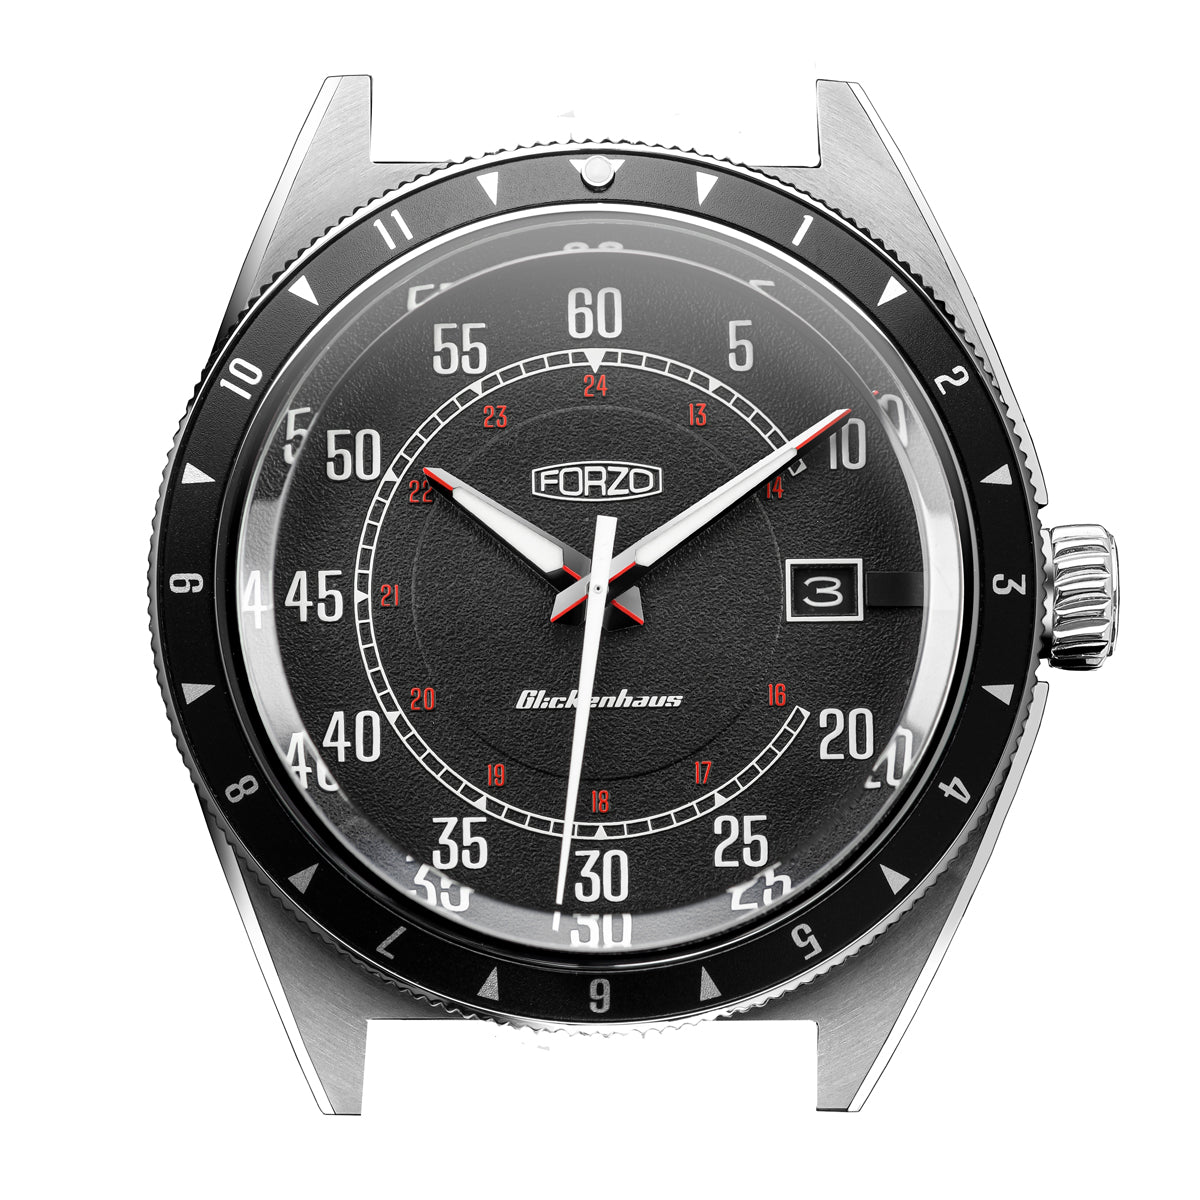 FORZO Glickenhaus Automatic Black and Red SS-B02-B